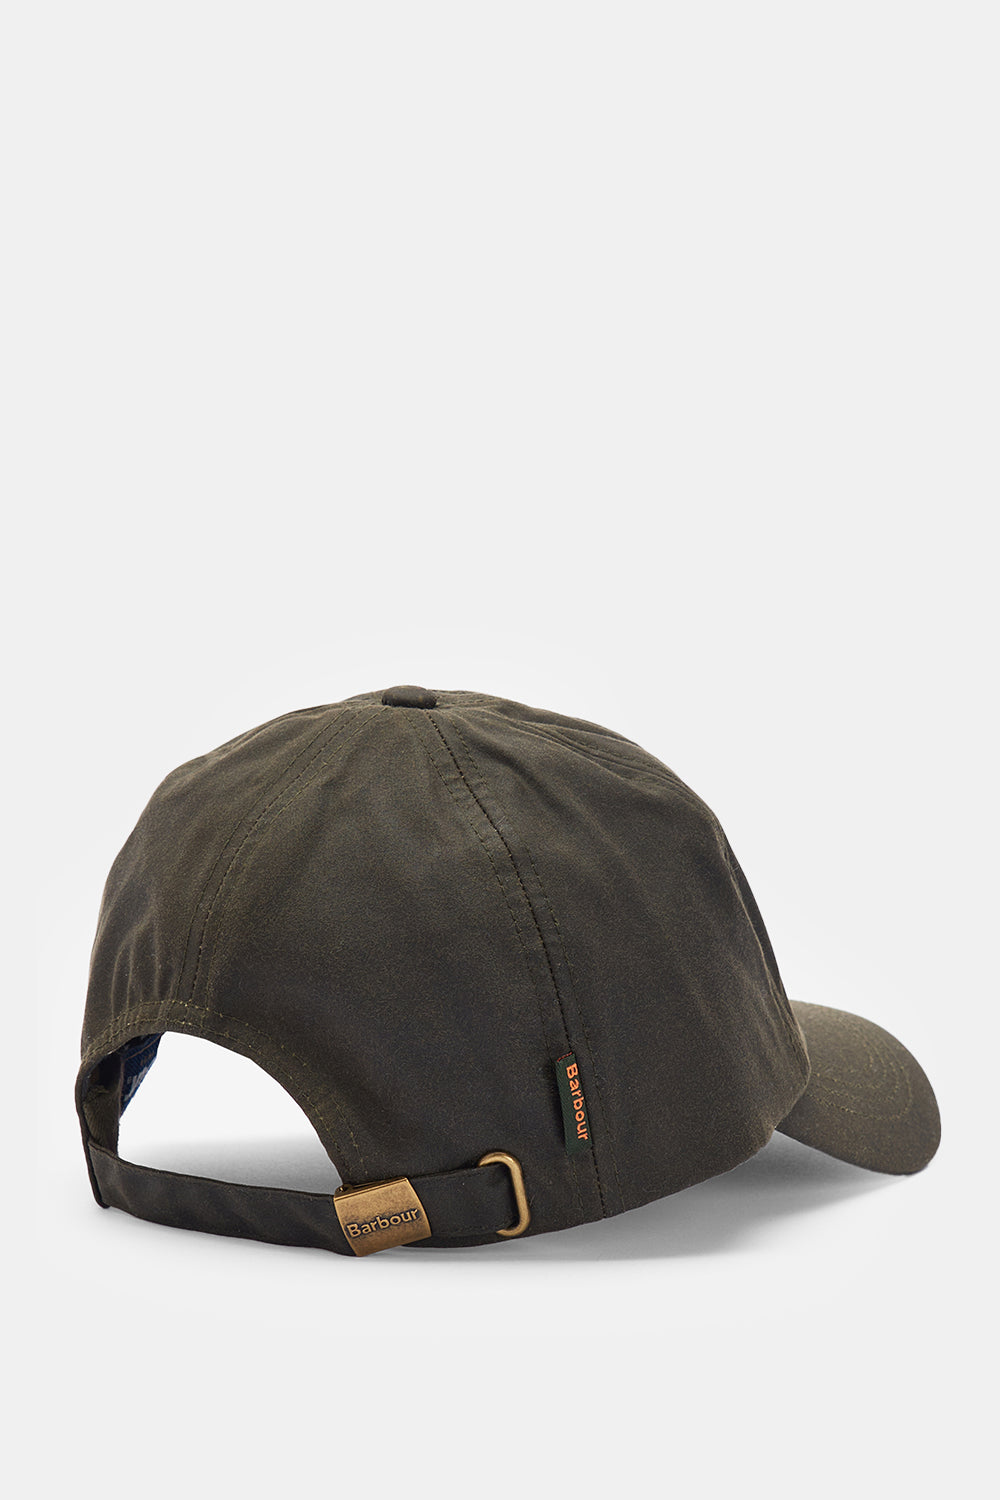 Barbour Wax Sports Cap (Olive)